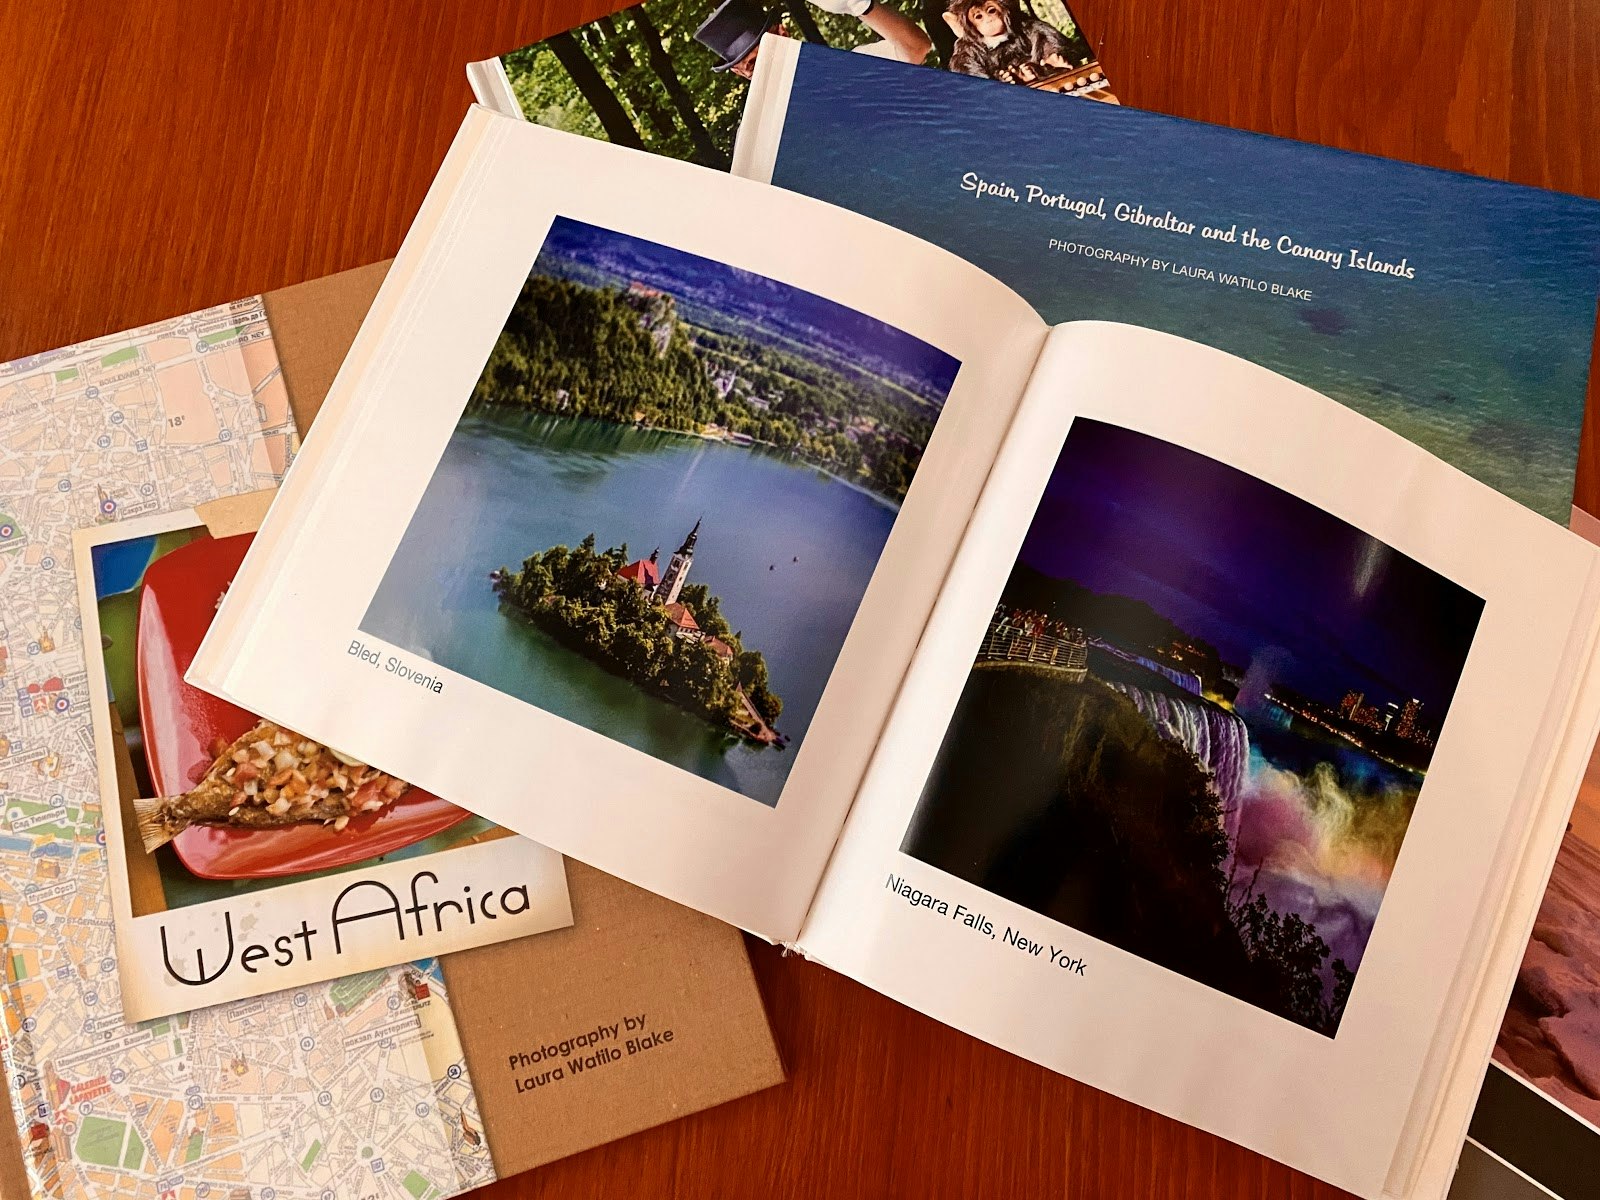 A photo book overlays several other travel documents, including a map, a postcard from West Africa, and two other books 